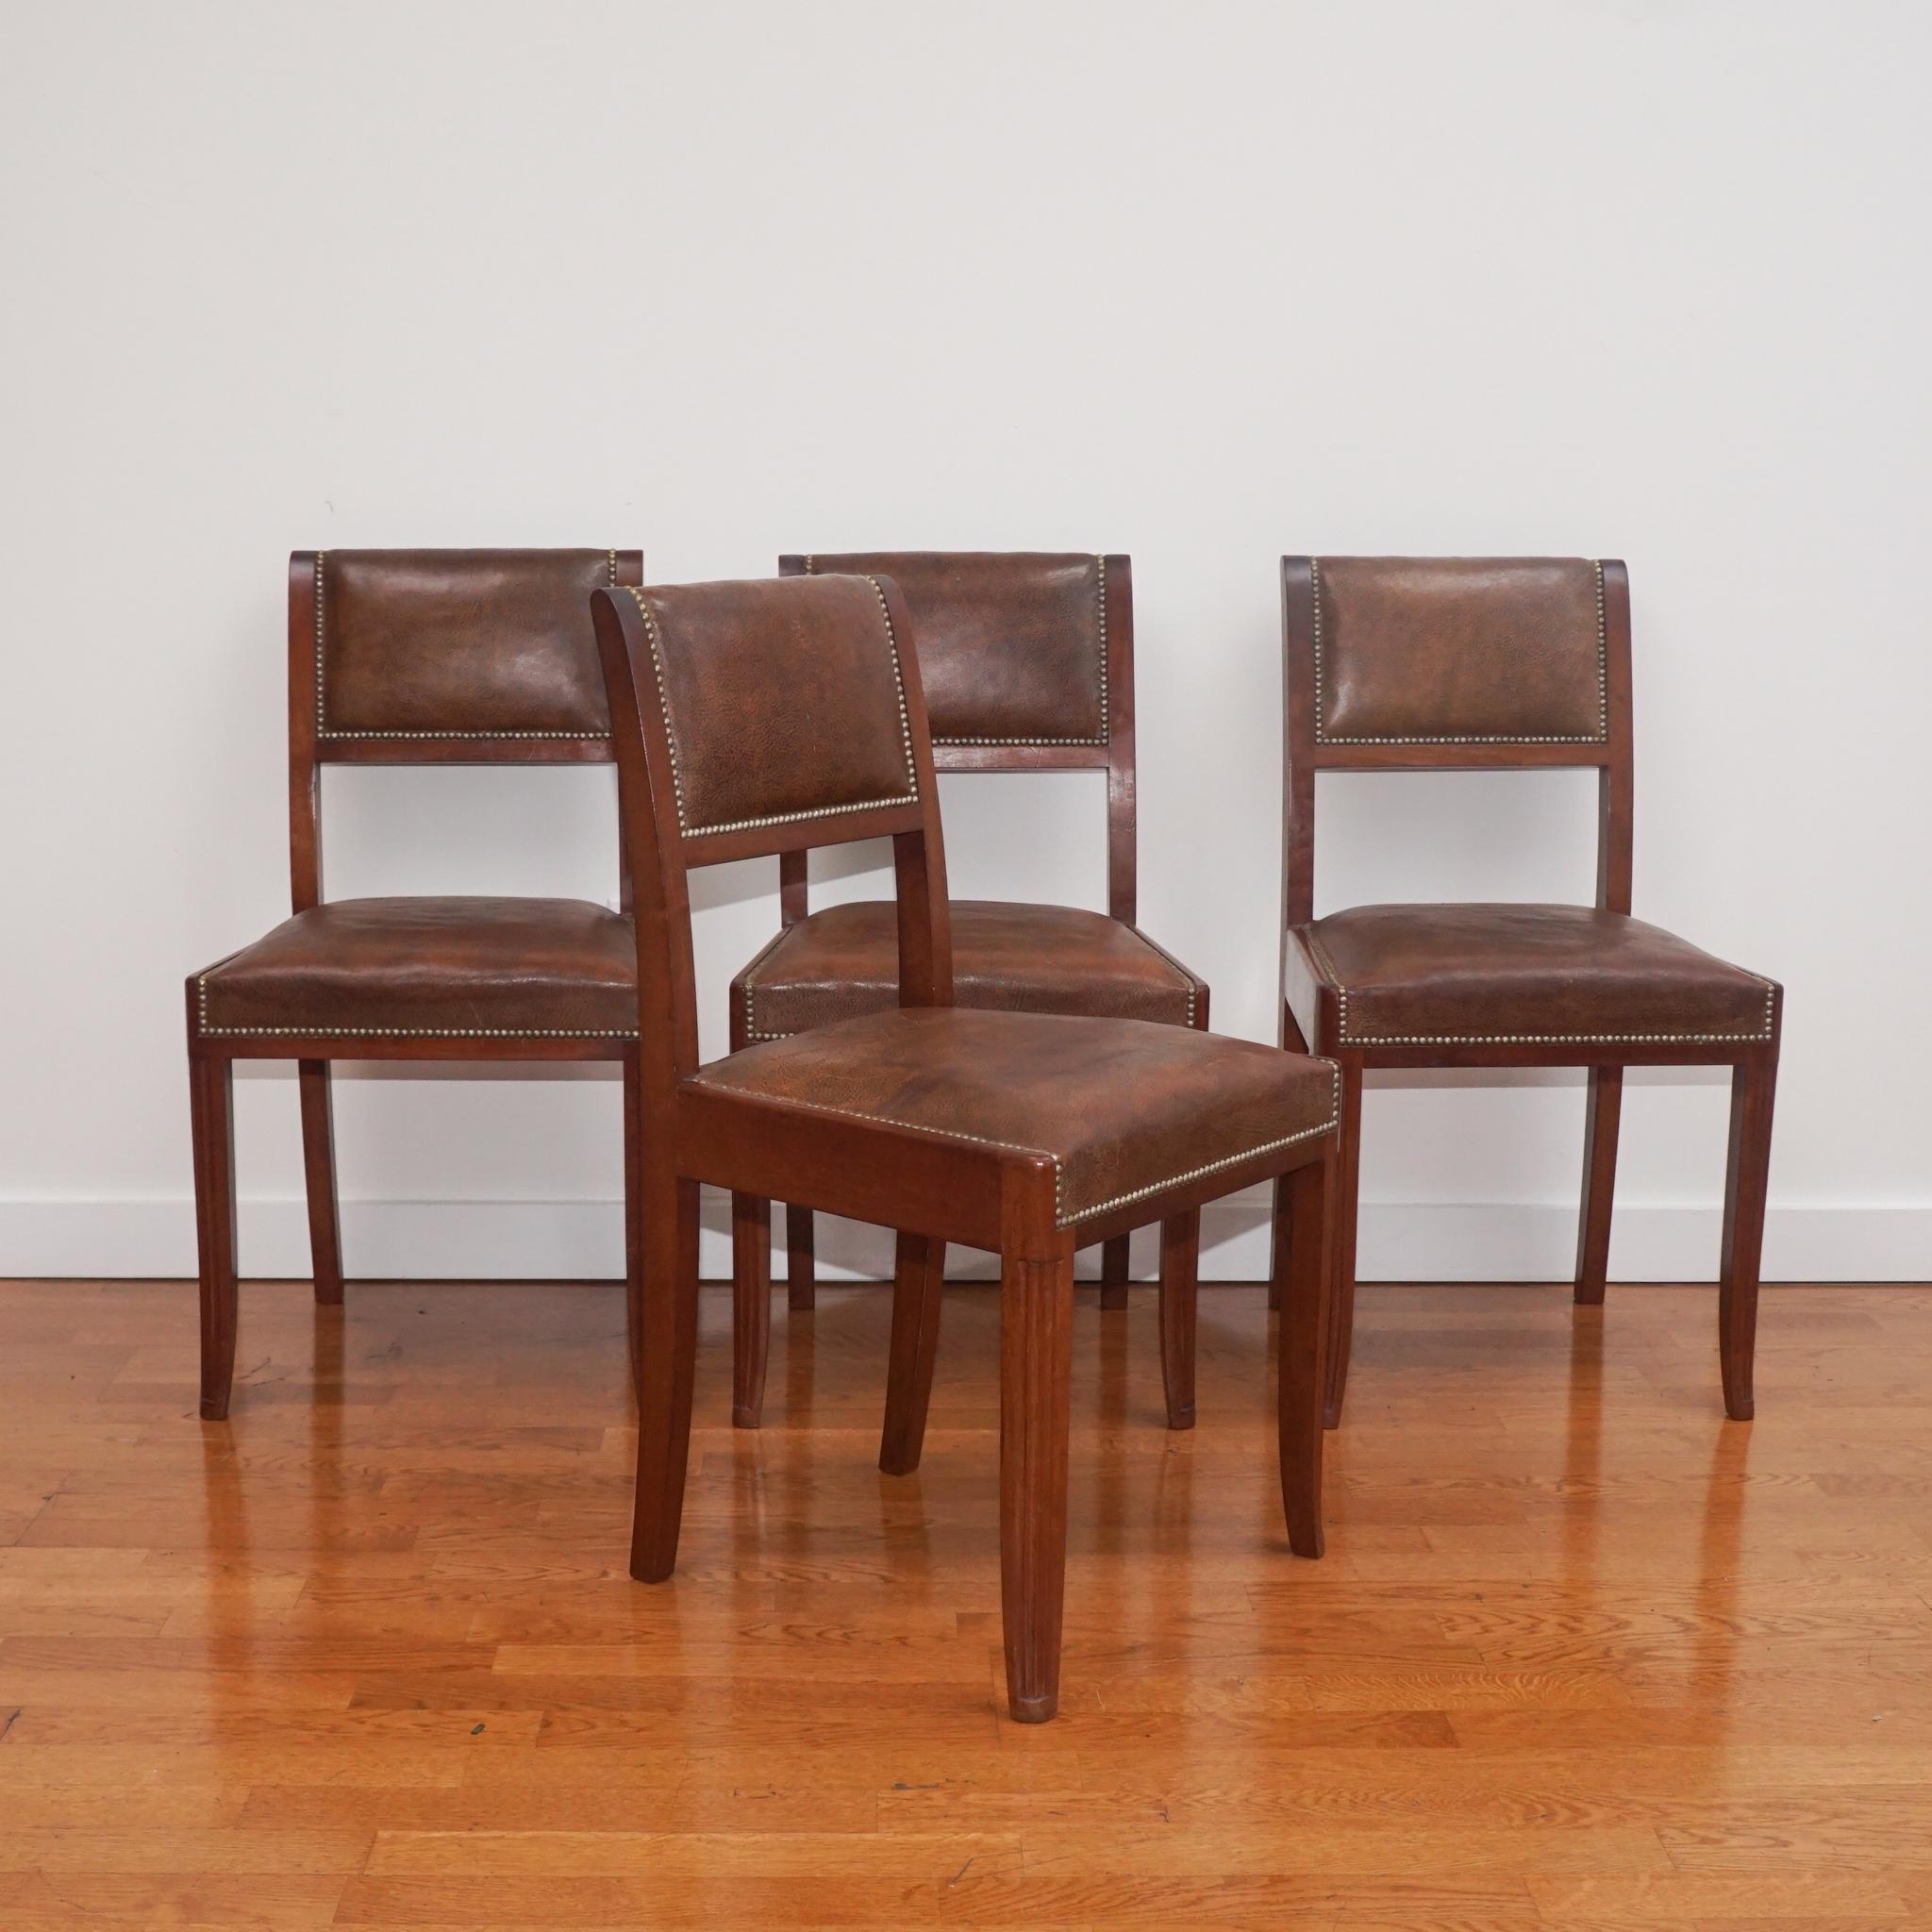 The set of four French Art Deco side chairs, shown here, have been recently restored and freshly polished. Featuring rich, brown leather seat and back rests, each chair is accented with brass nail head trim and detailed with fluted front legs. Sold